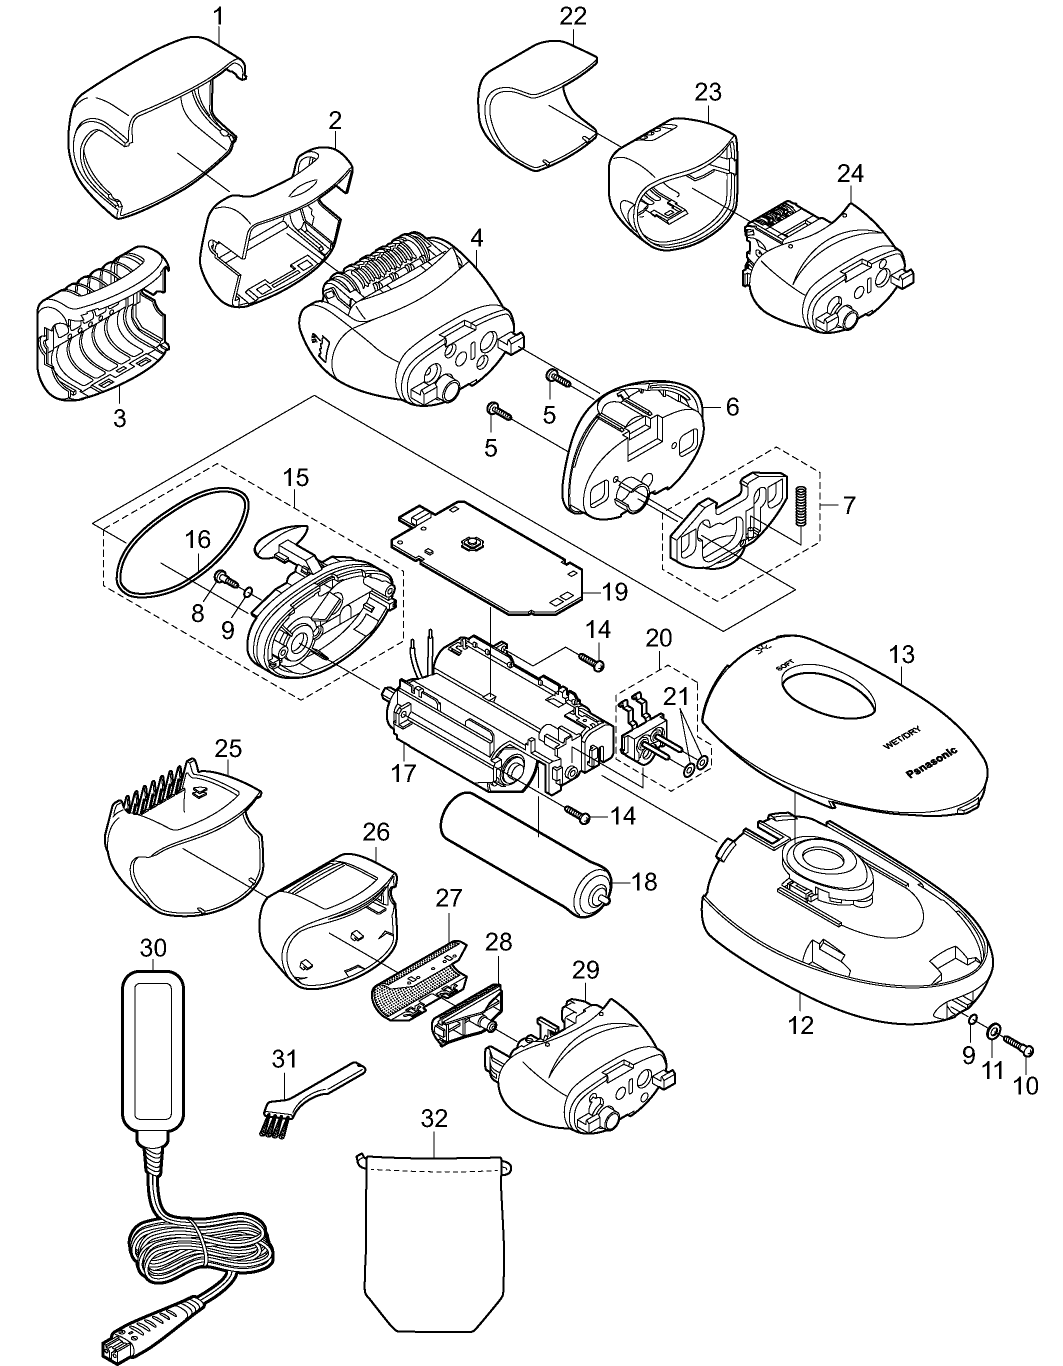 ES-ED70: Exploded View